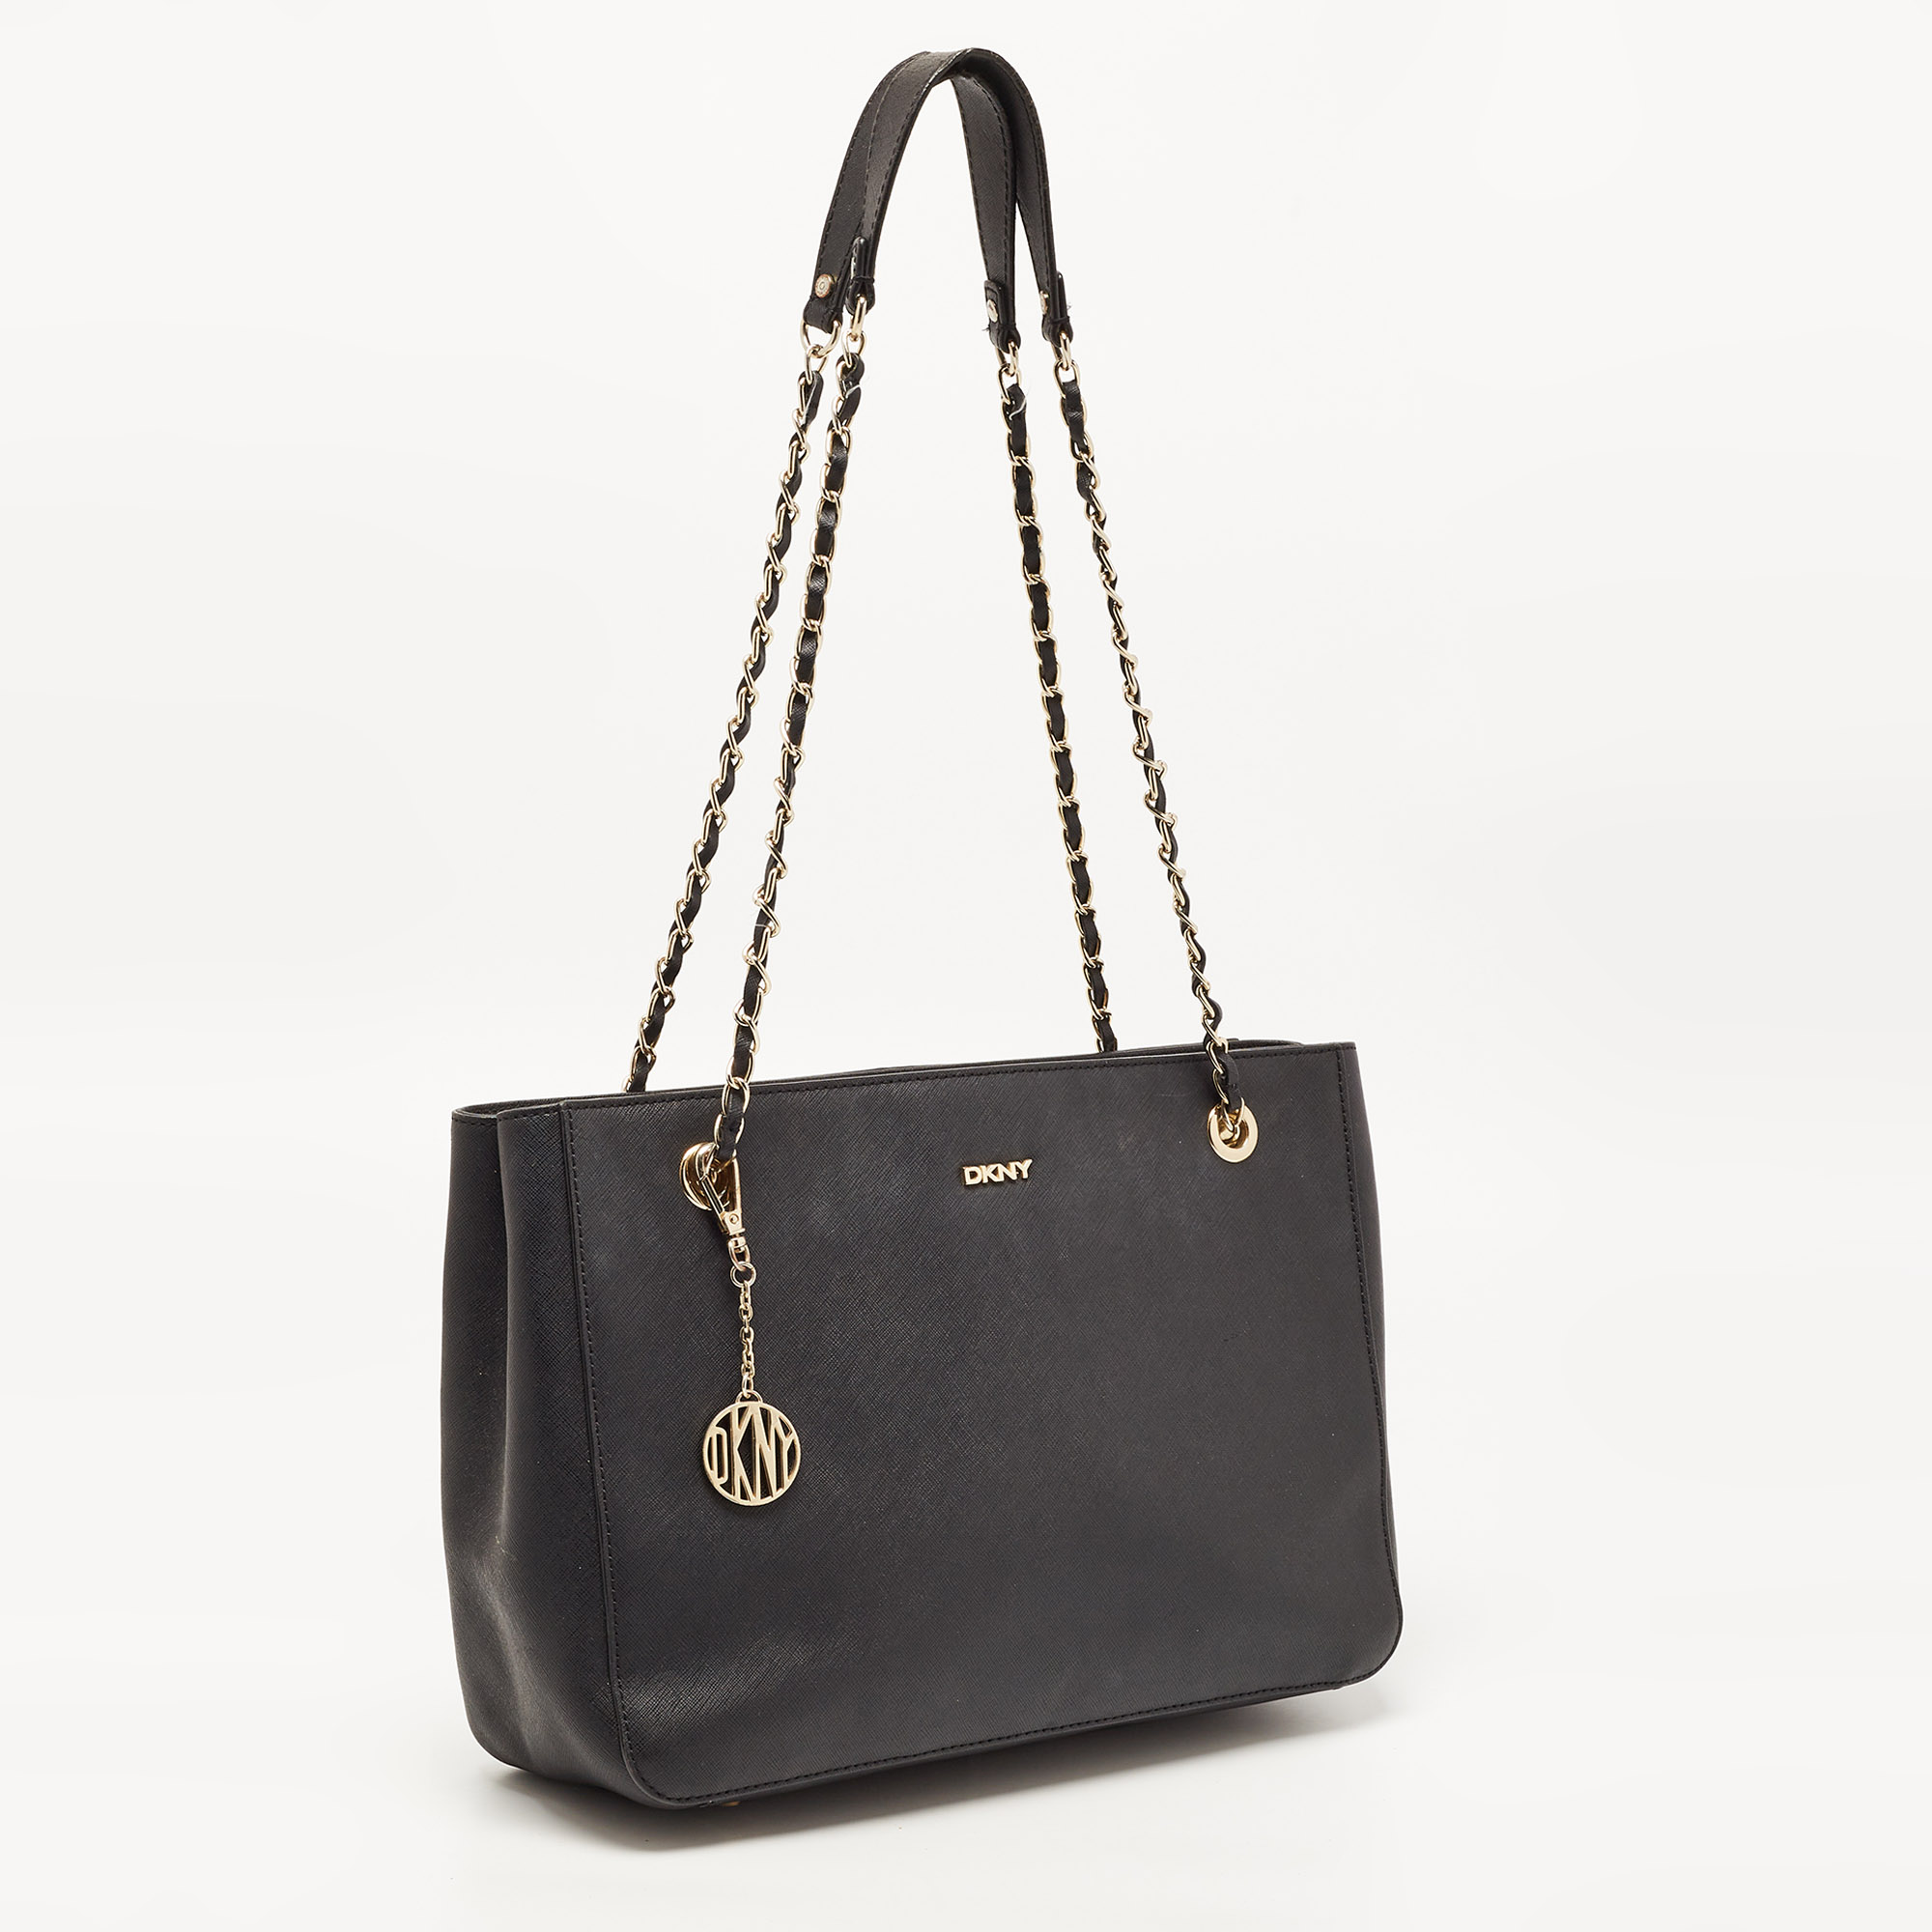 DKNY Black Leather Chain Handle Tote